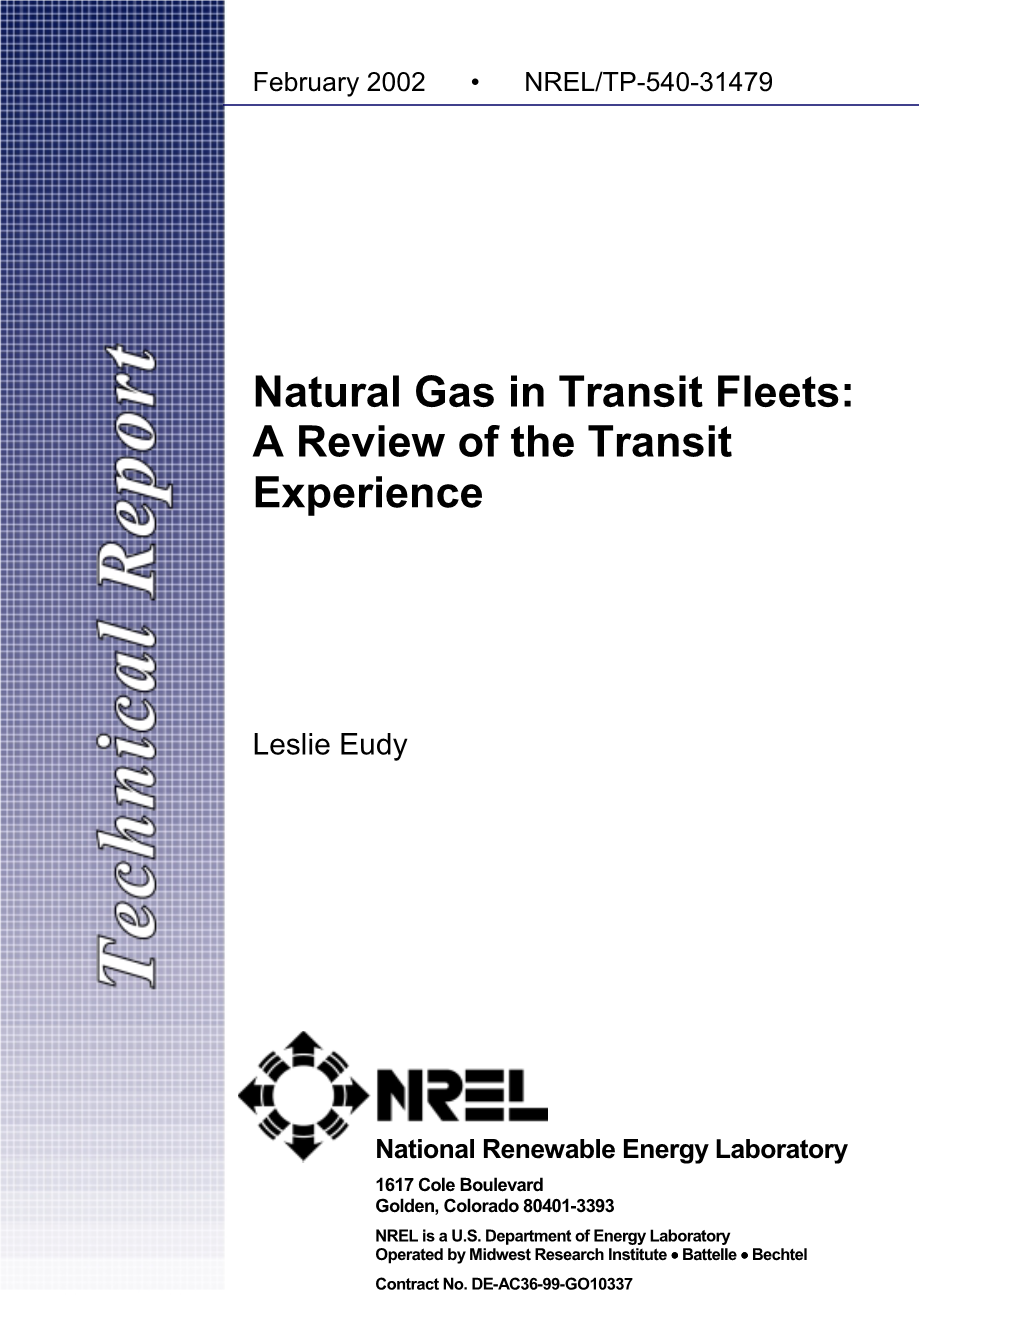 Natural Gas in Transit Fleets: a Review of the Transit Experience